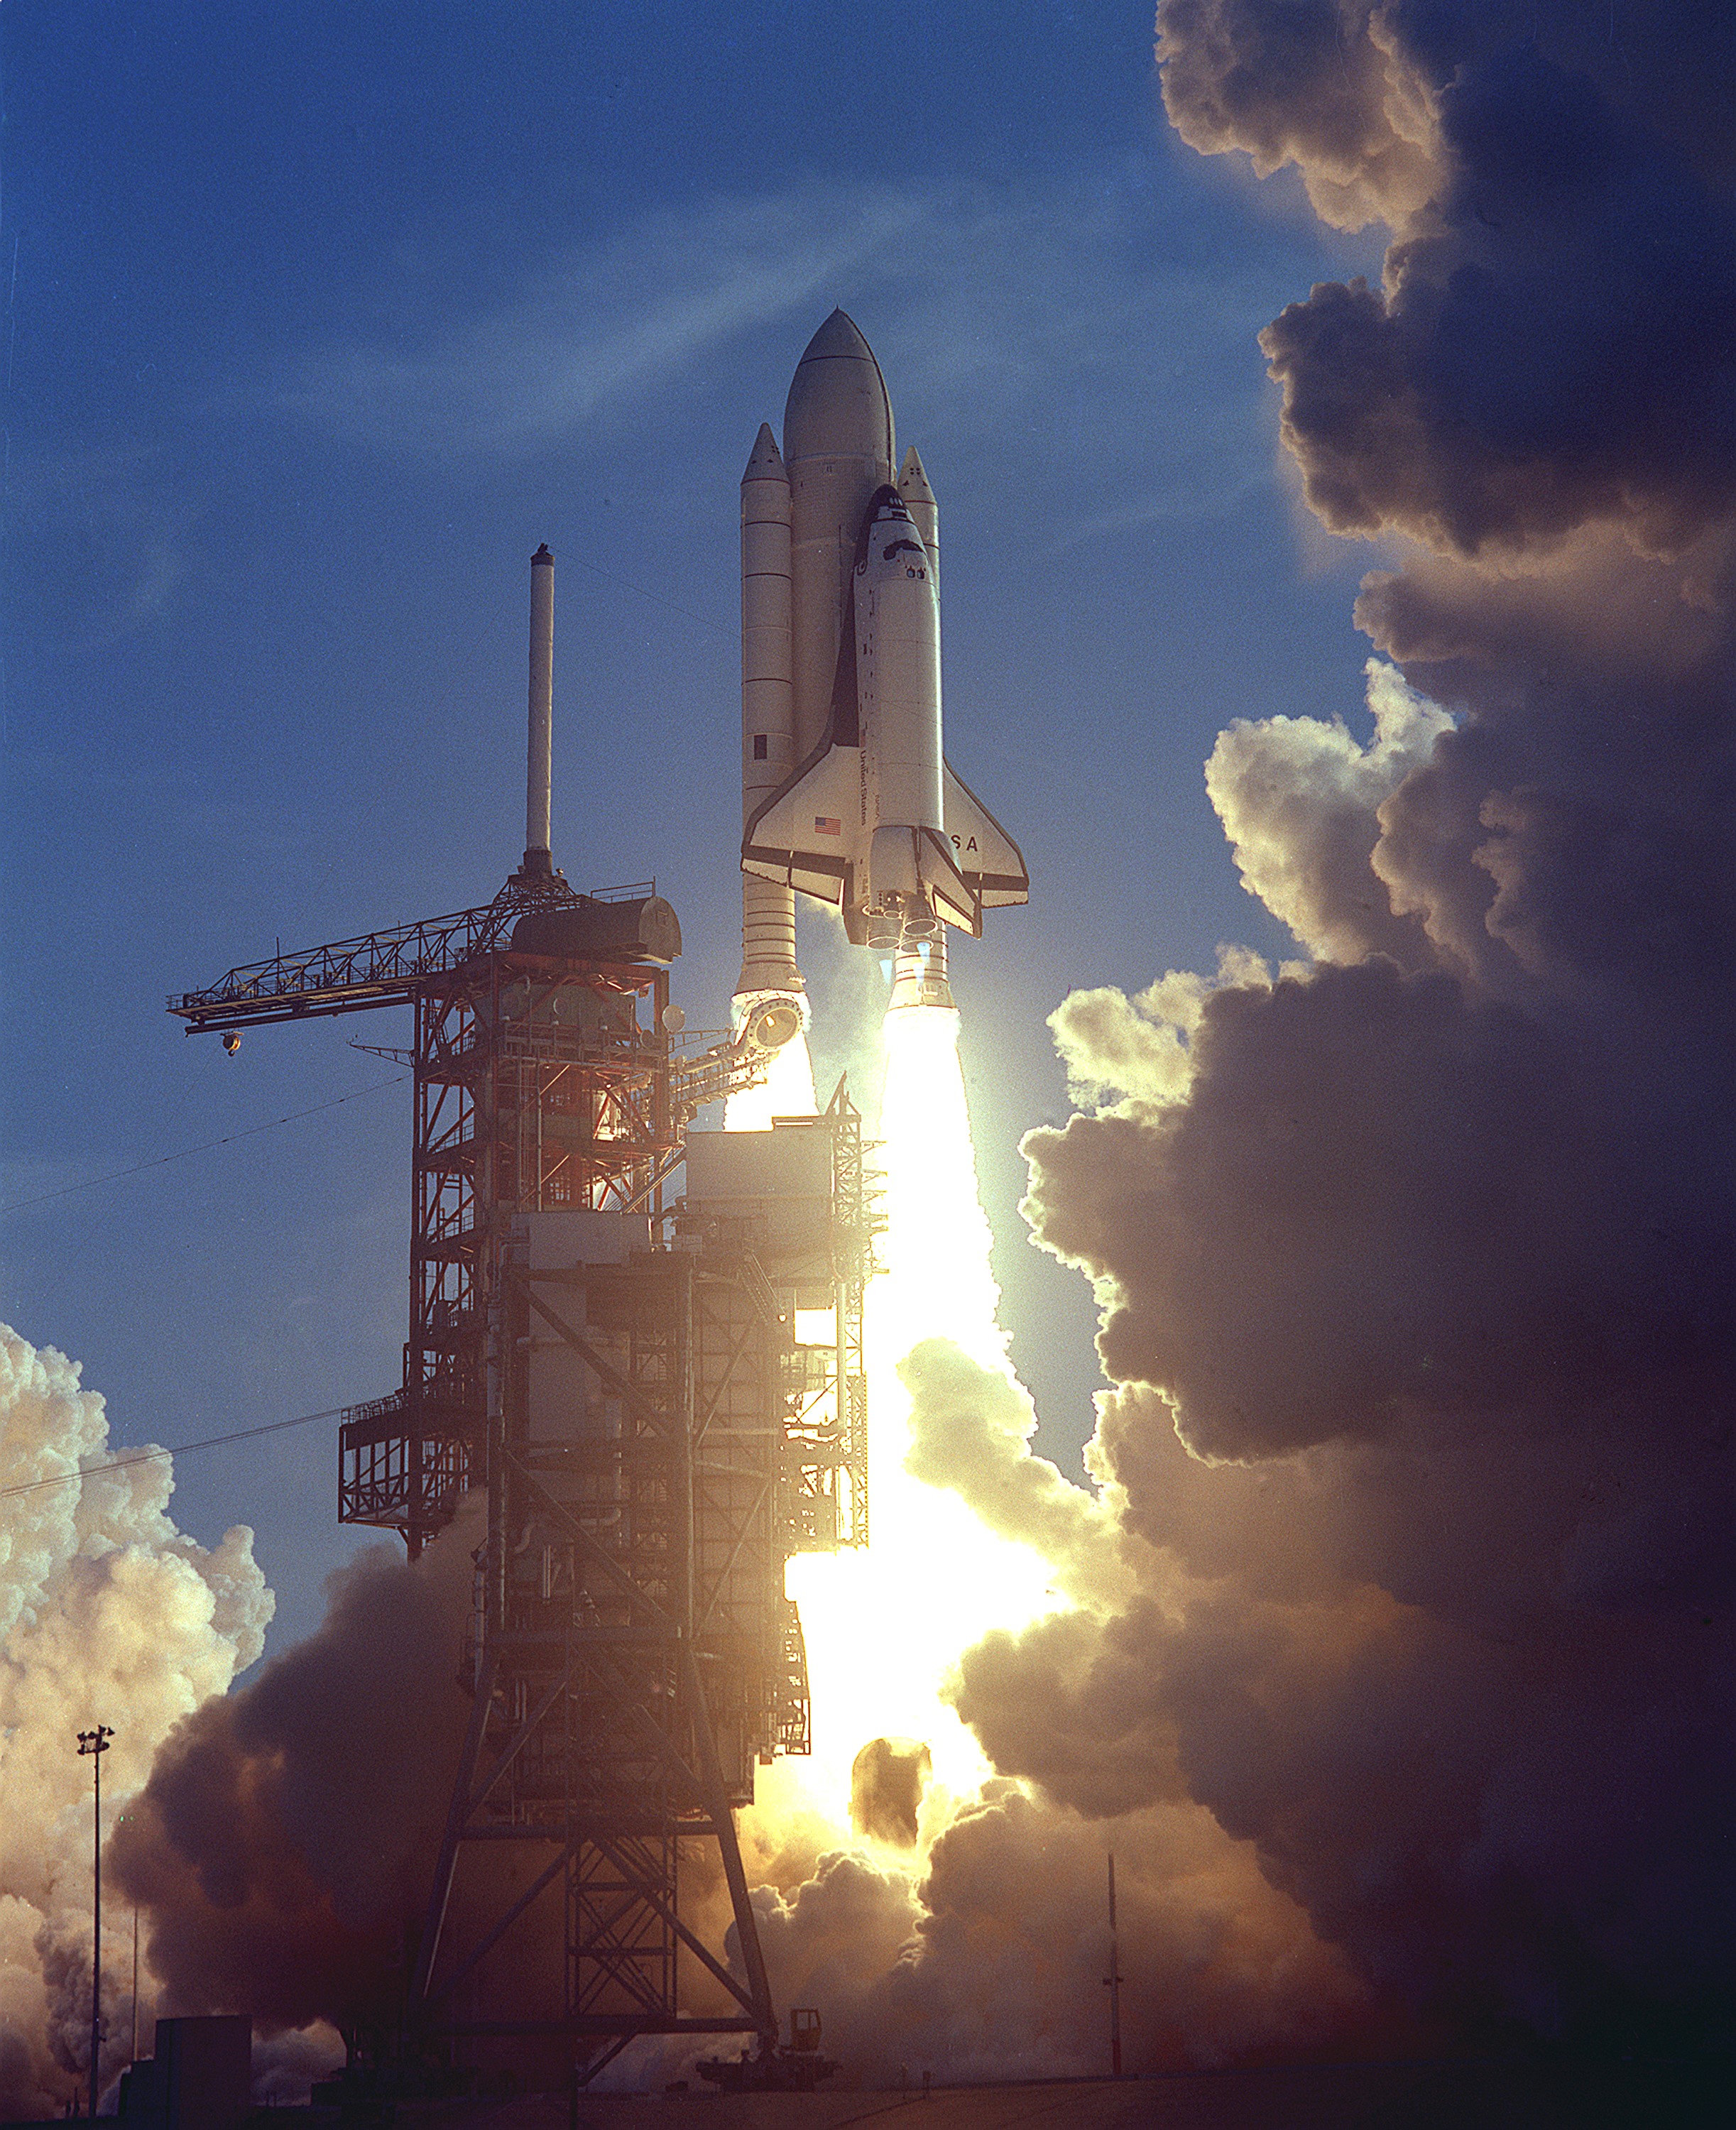 The first launch of Space Shuttle Columbia on STS-1.